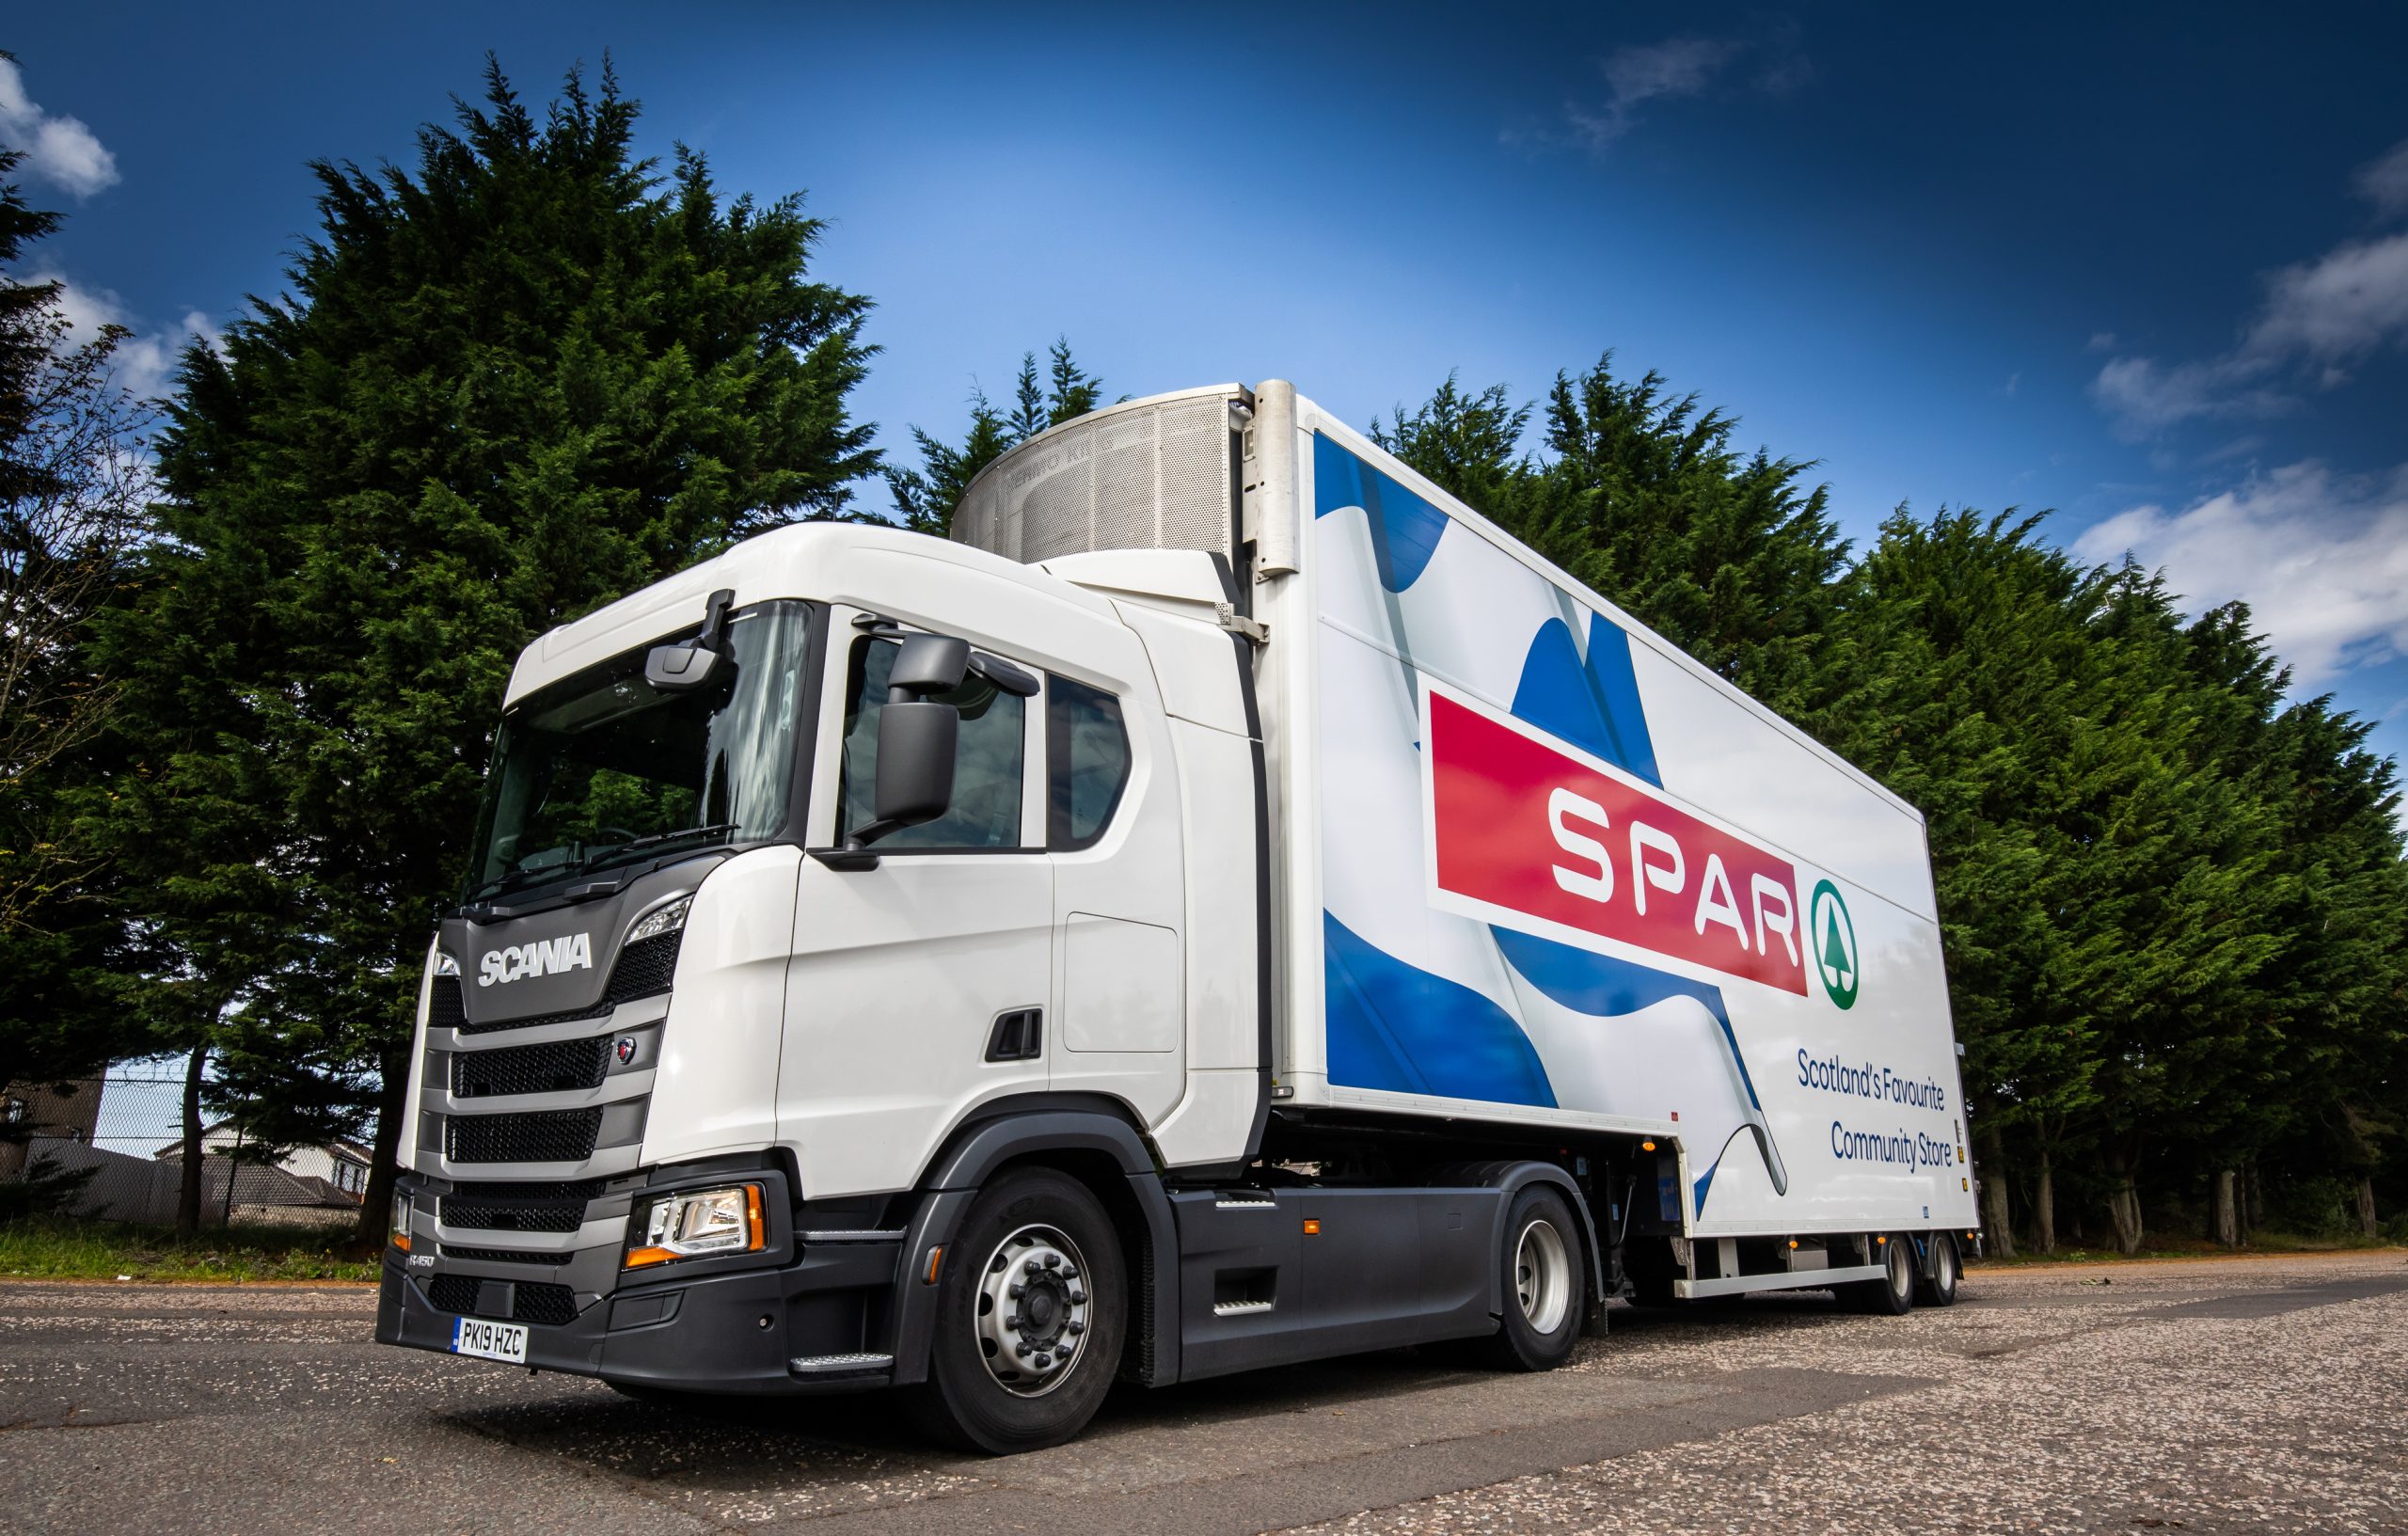 Prominent c-stores added in SPAR Scotland family